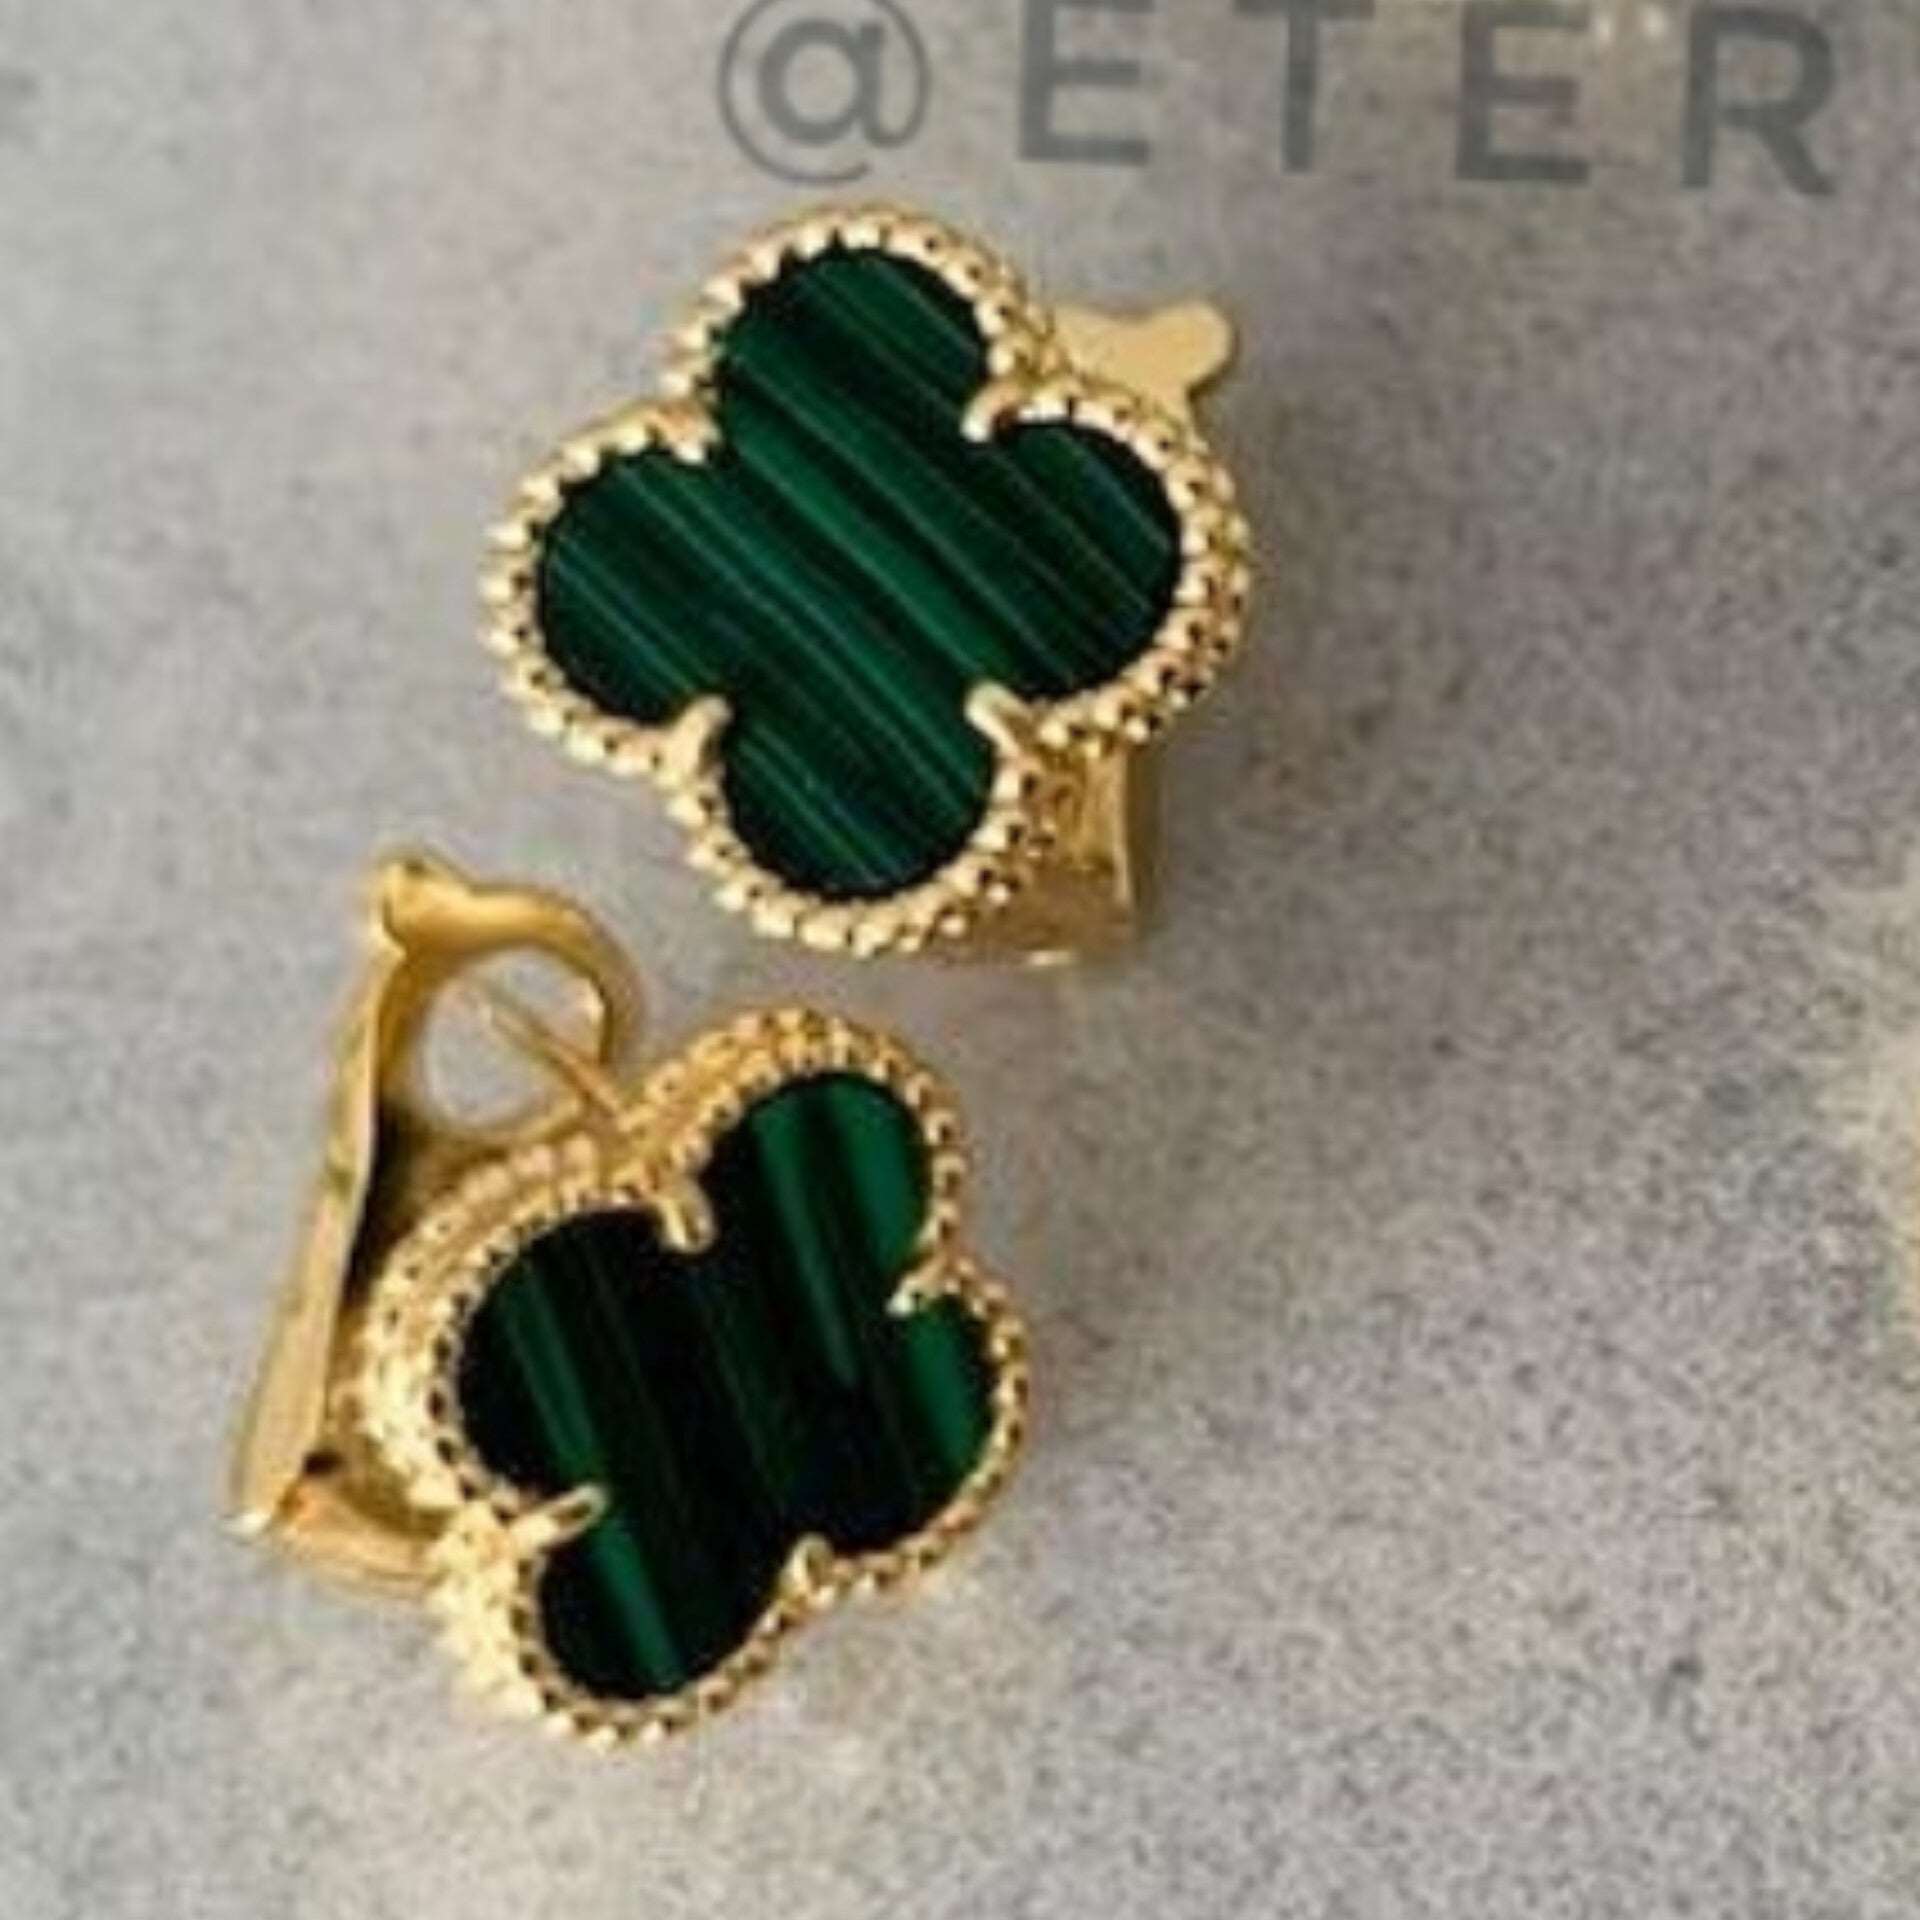 Clover Earrings Etereo vc with clip